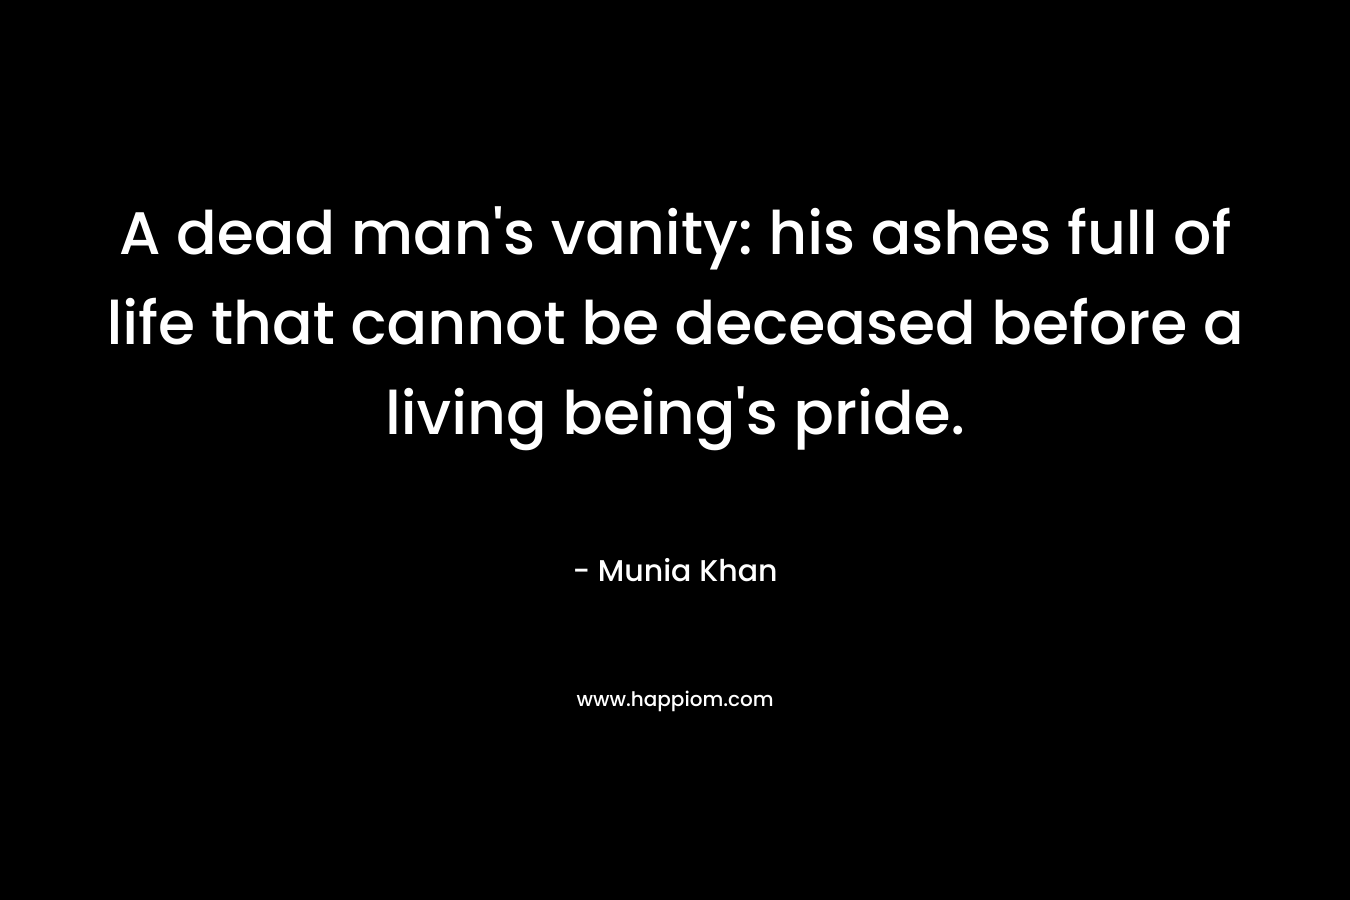 A dead man’s vanity: his ashes full of life that cannot be deceased before a living being’s pride. – Munia Khan